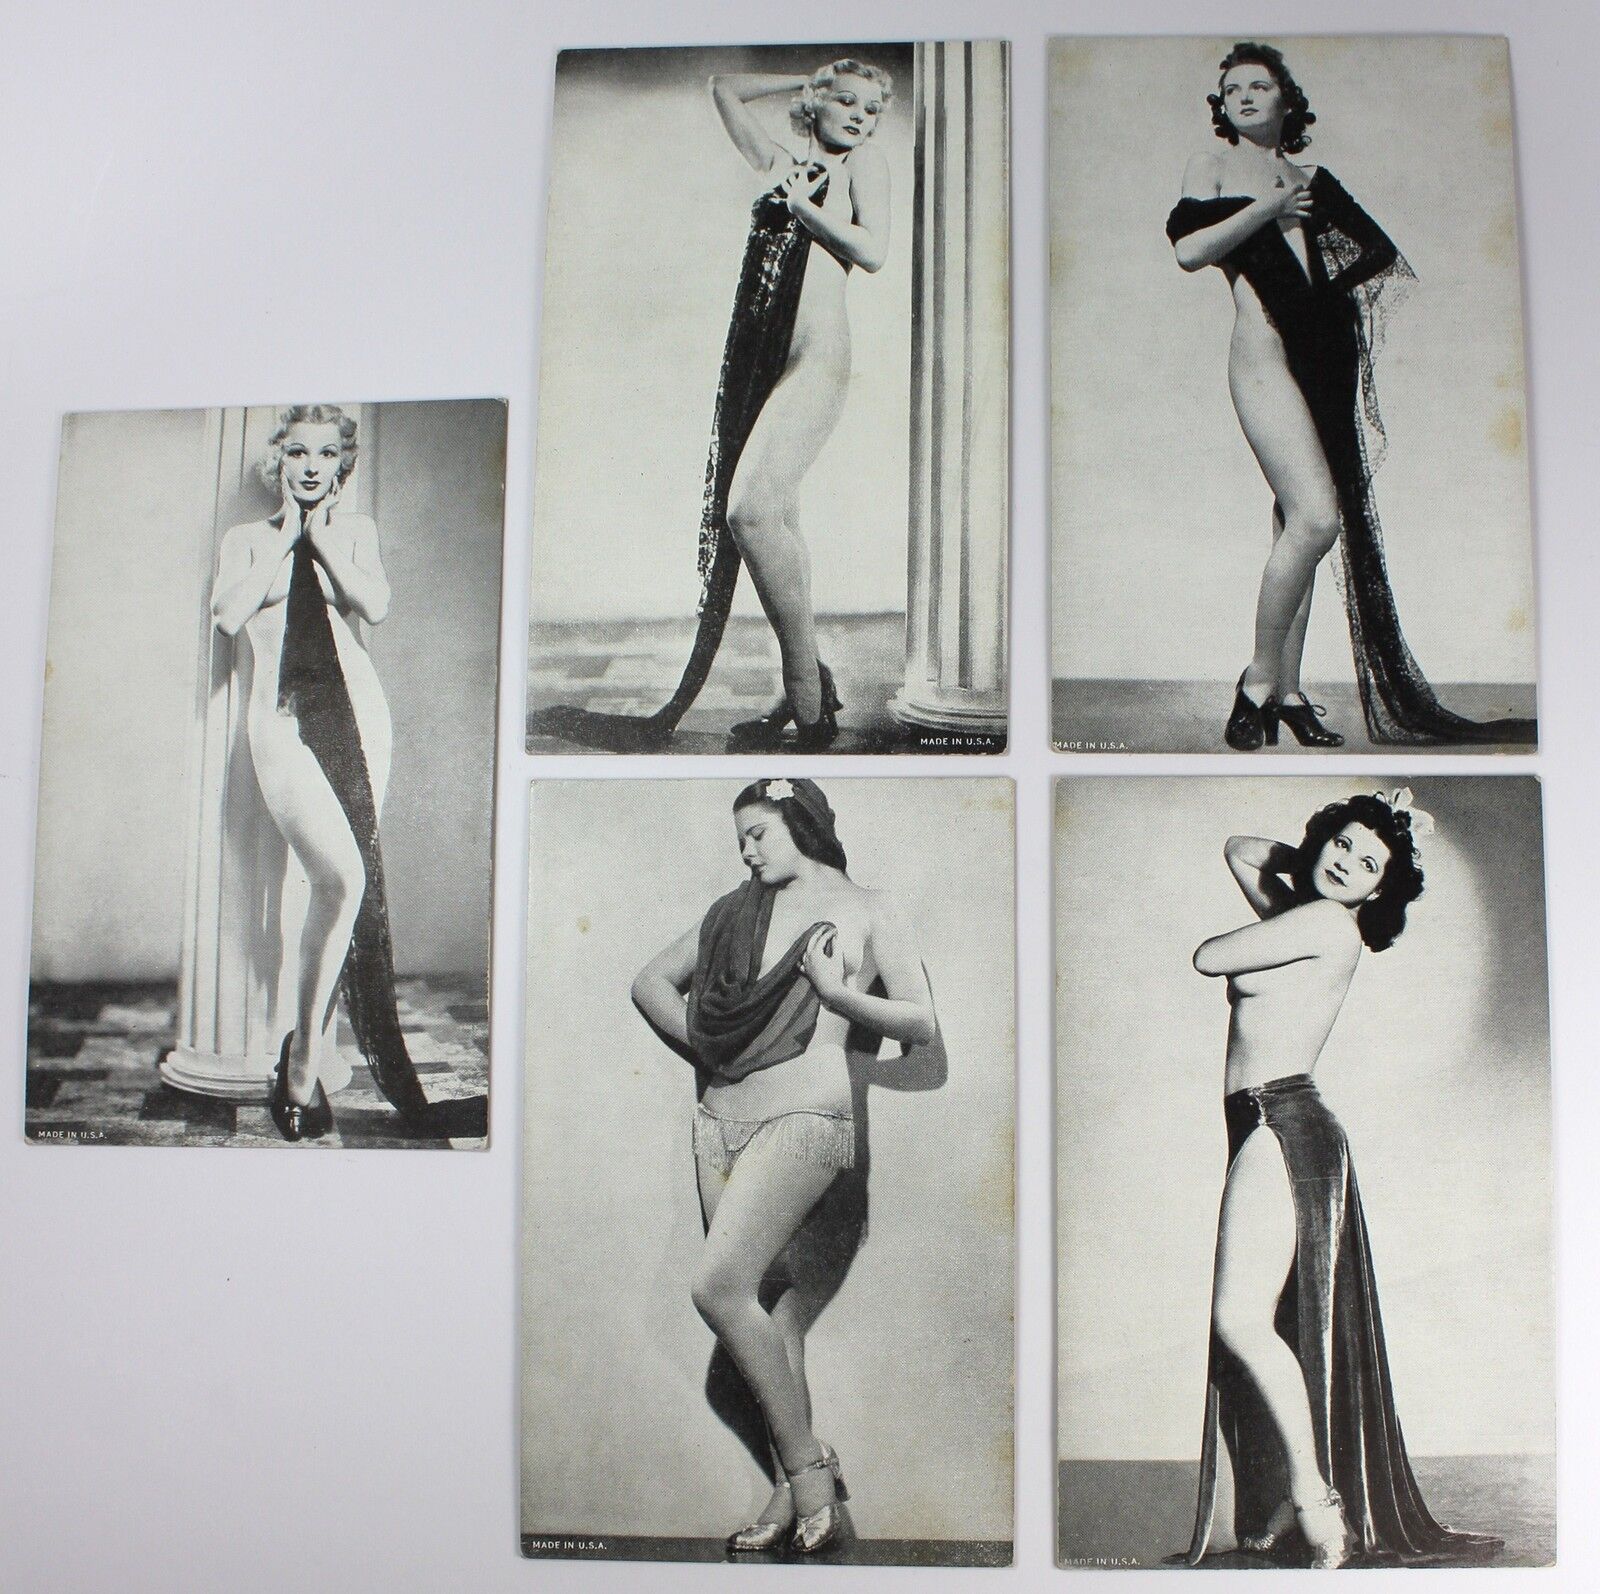 Vintage Risque Semi Nude Black & White Art Cards Made in U.S.A. c 1930s